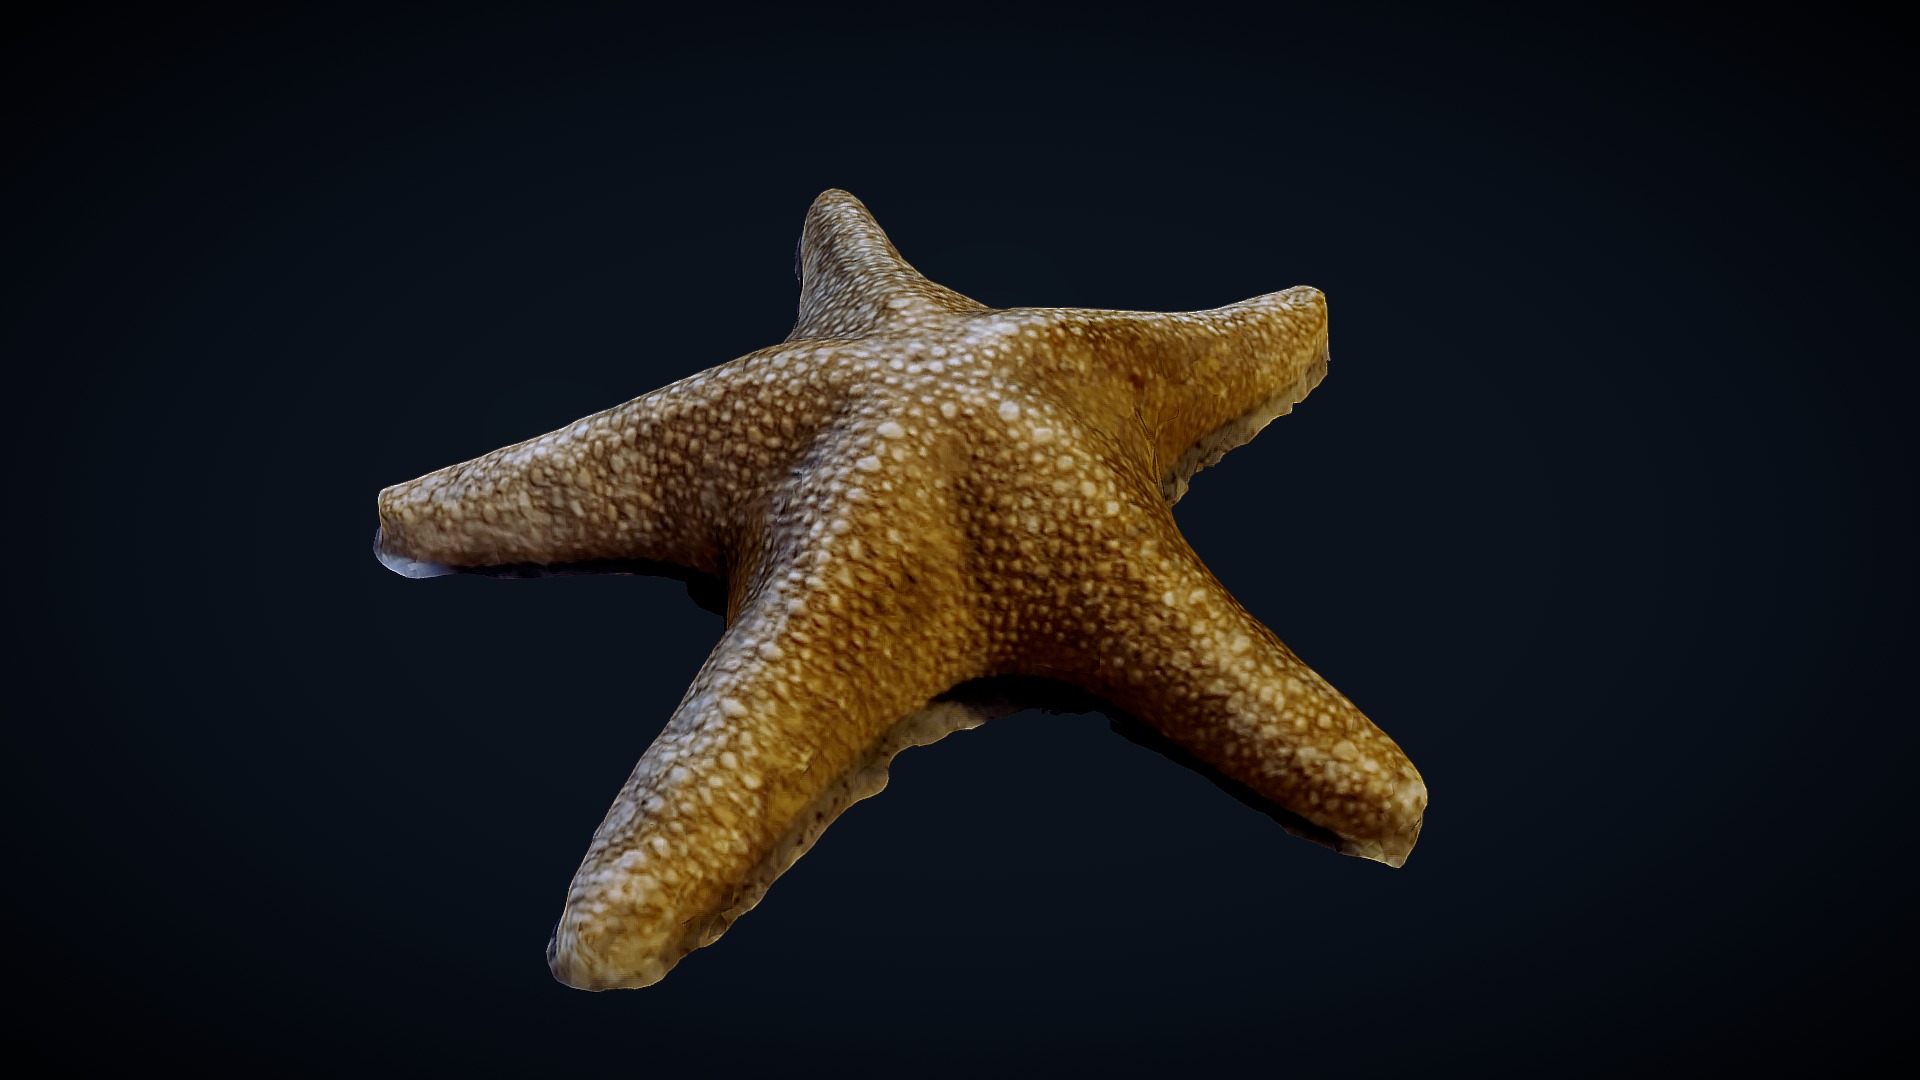 3D model StarFish 3D scan - This is a 3D model of the StarFish 3D scan. The 3D model is about a starfish in the water.